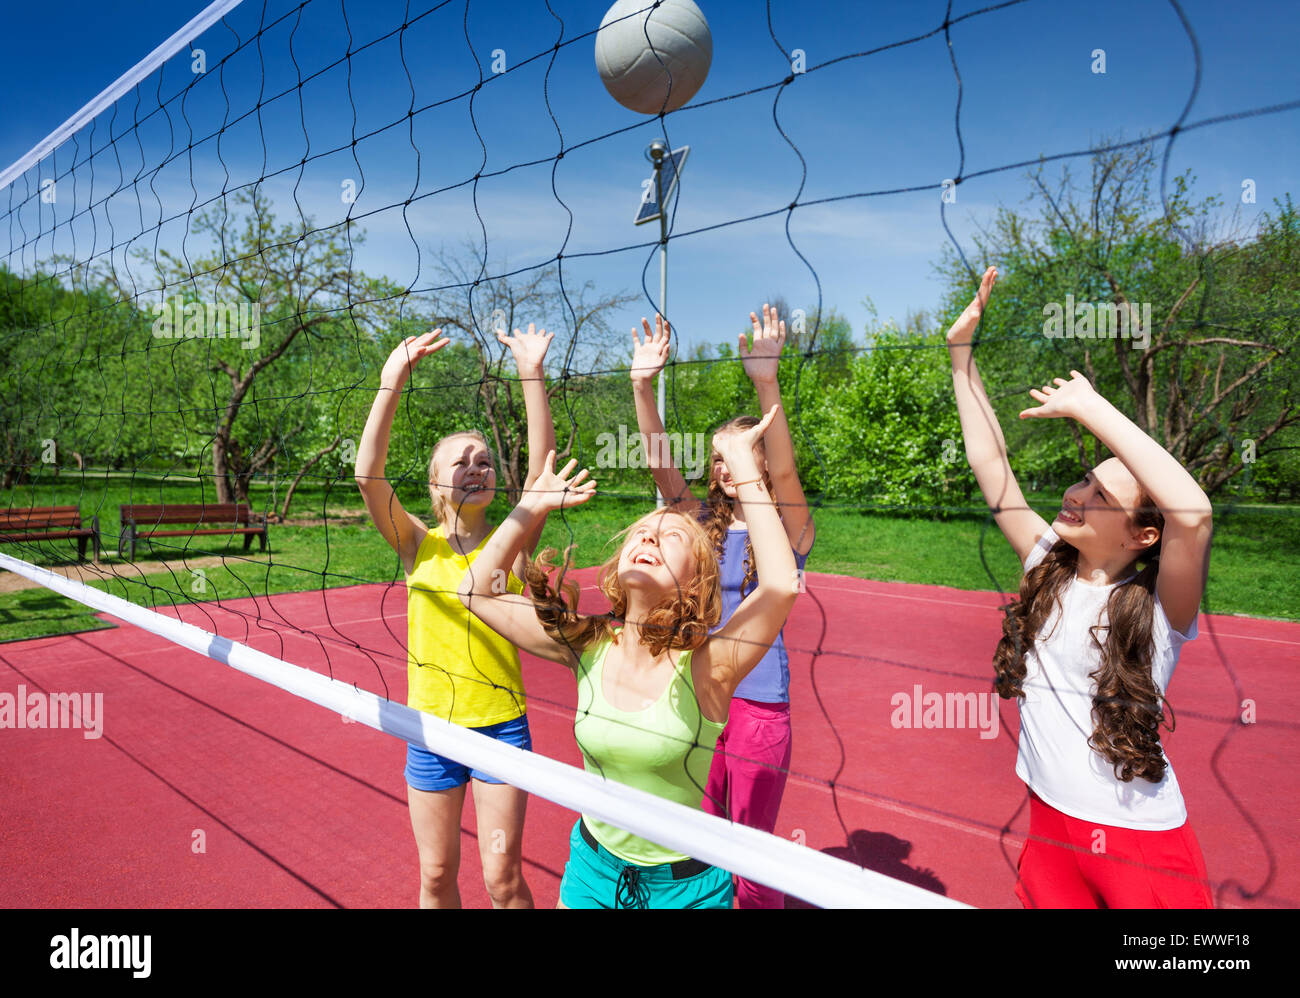 View through volleyball net of playing girls Stock Photo